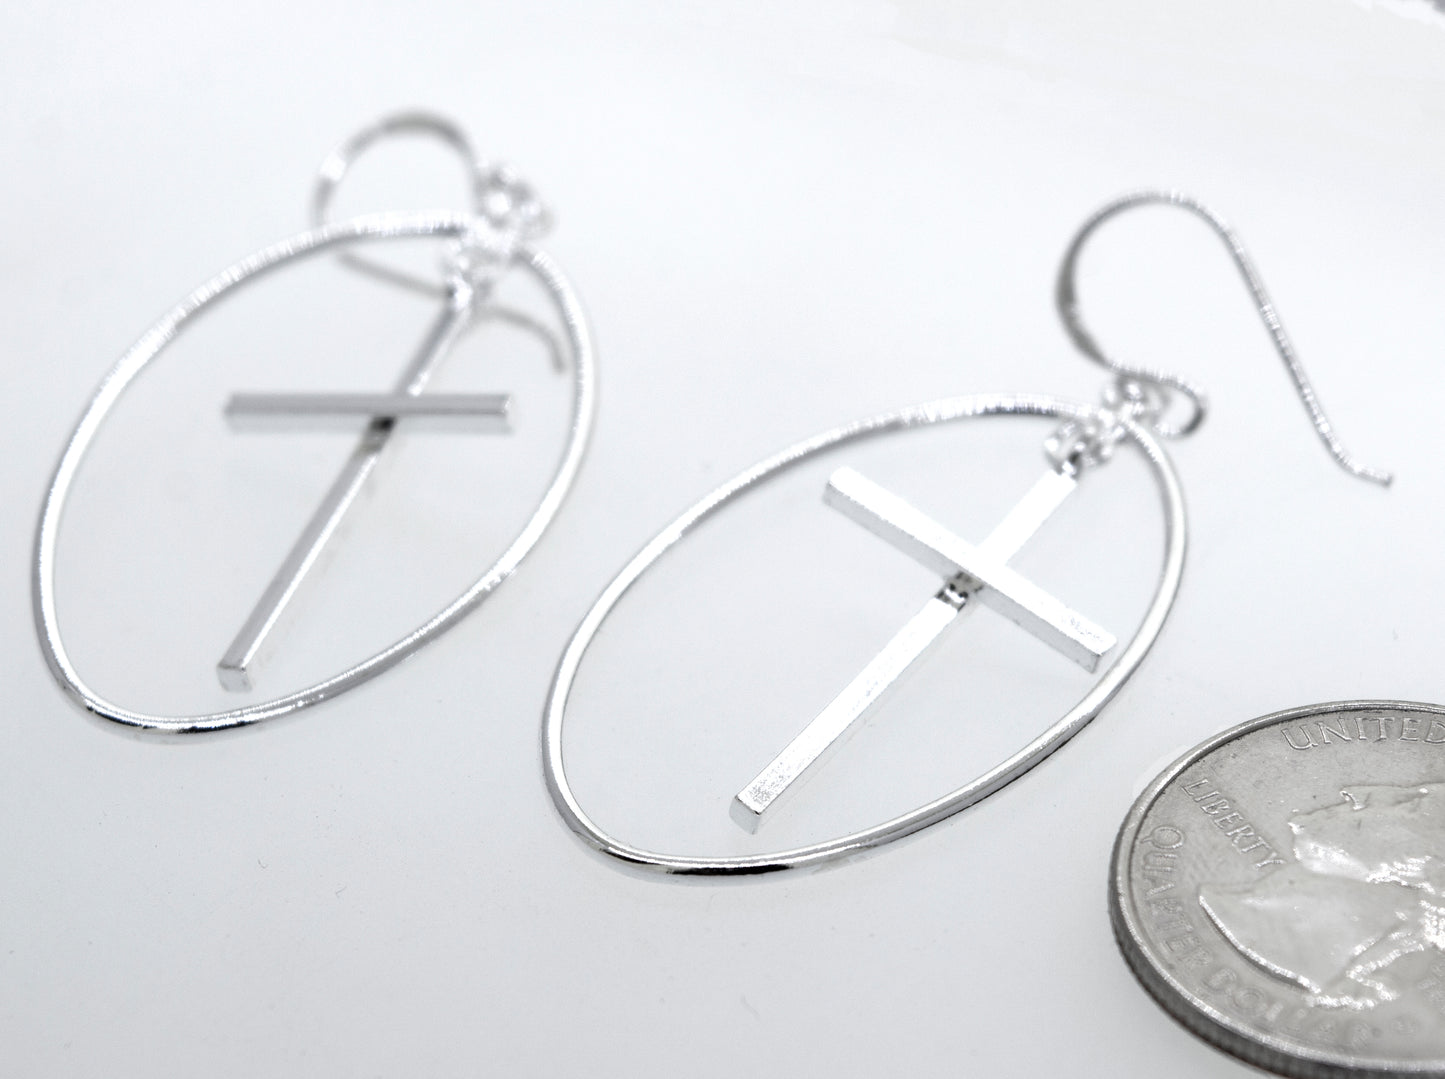 
                  
                    A pair of Super Silver Modern Cross Earrings with an oval wire design casing.
                  
                